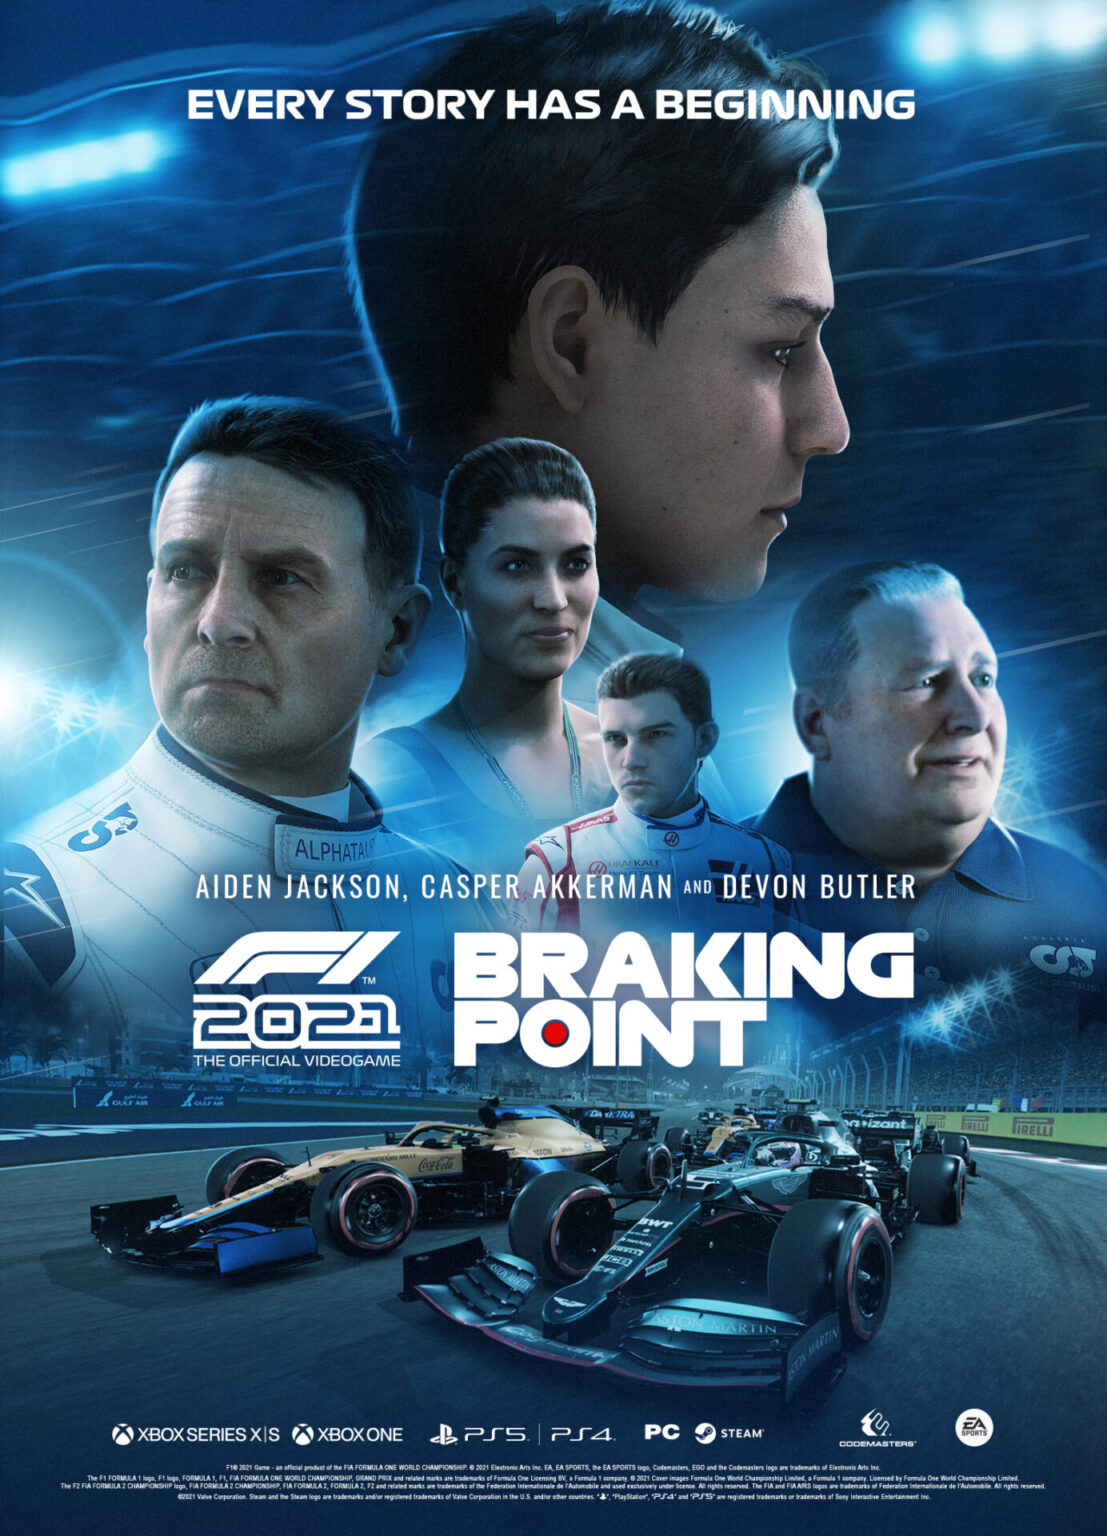 F1 2021 Reveals More Characters for Braking Point Story Mode